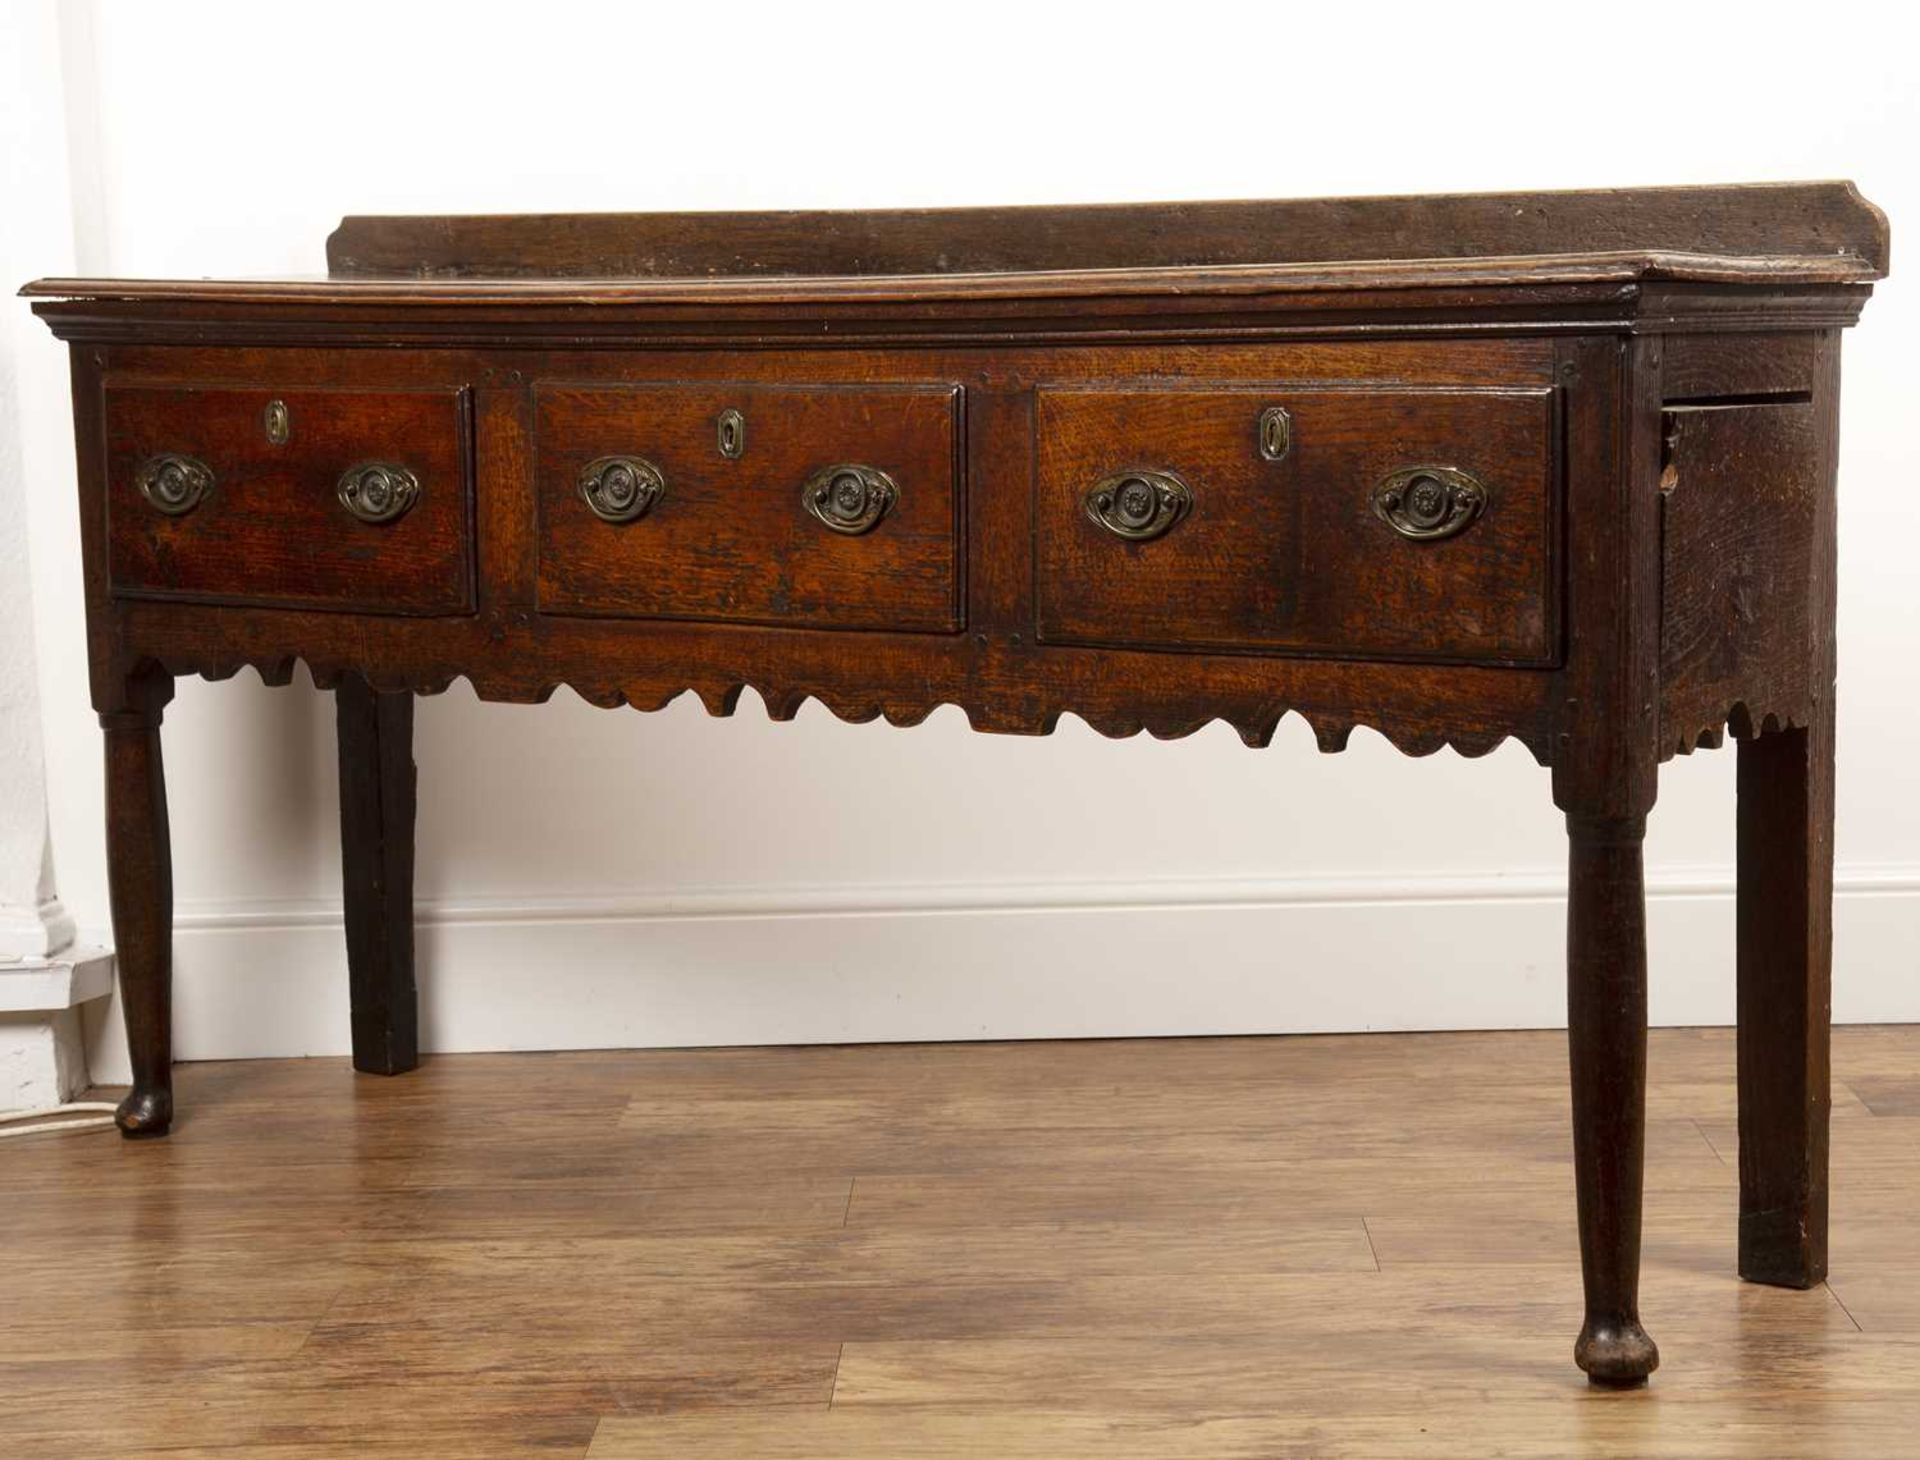 Oak dresser base early 19th Century, fitted with three drawers, on raised pad feet, 169cm wide x - Image 2 of 4